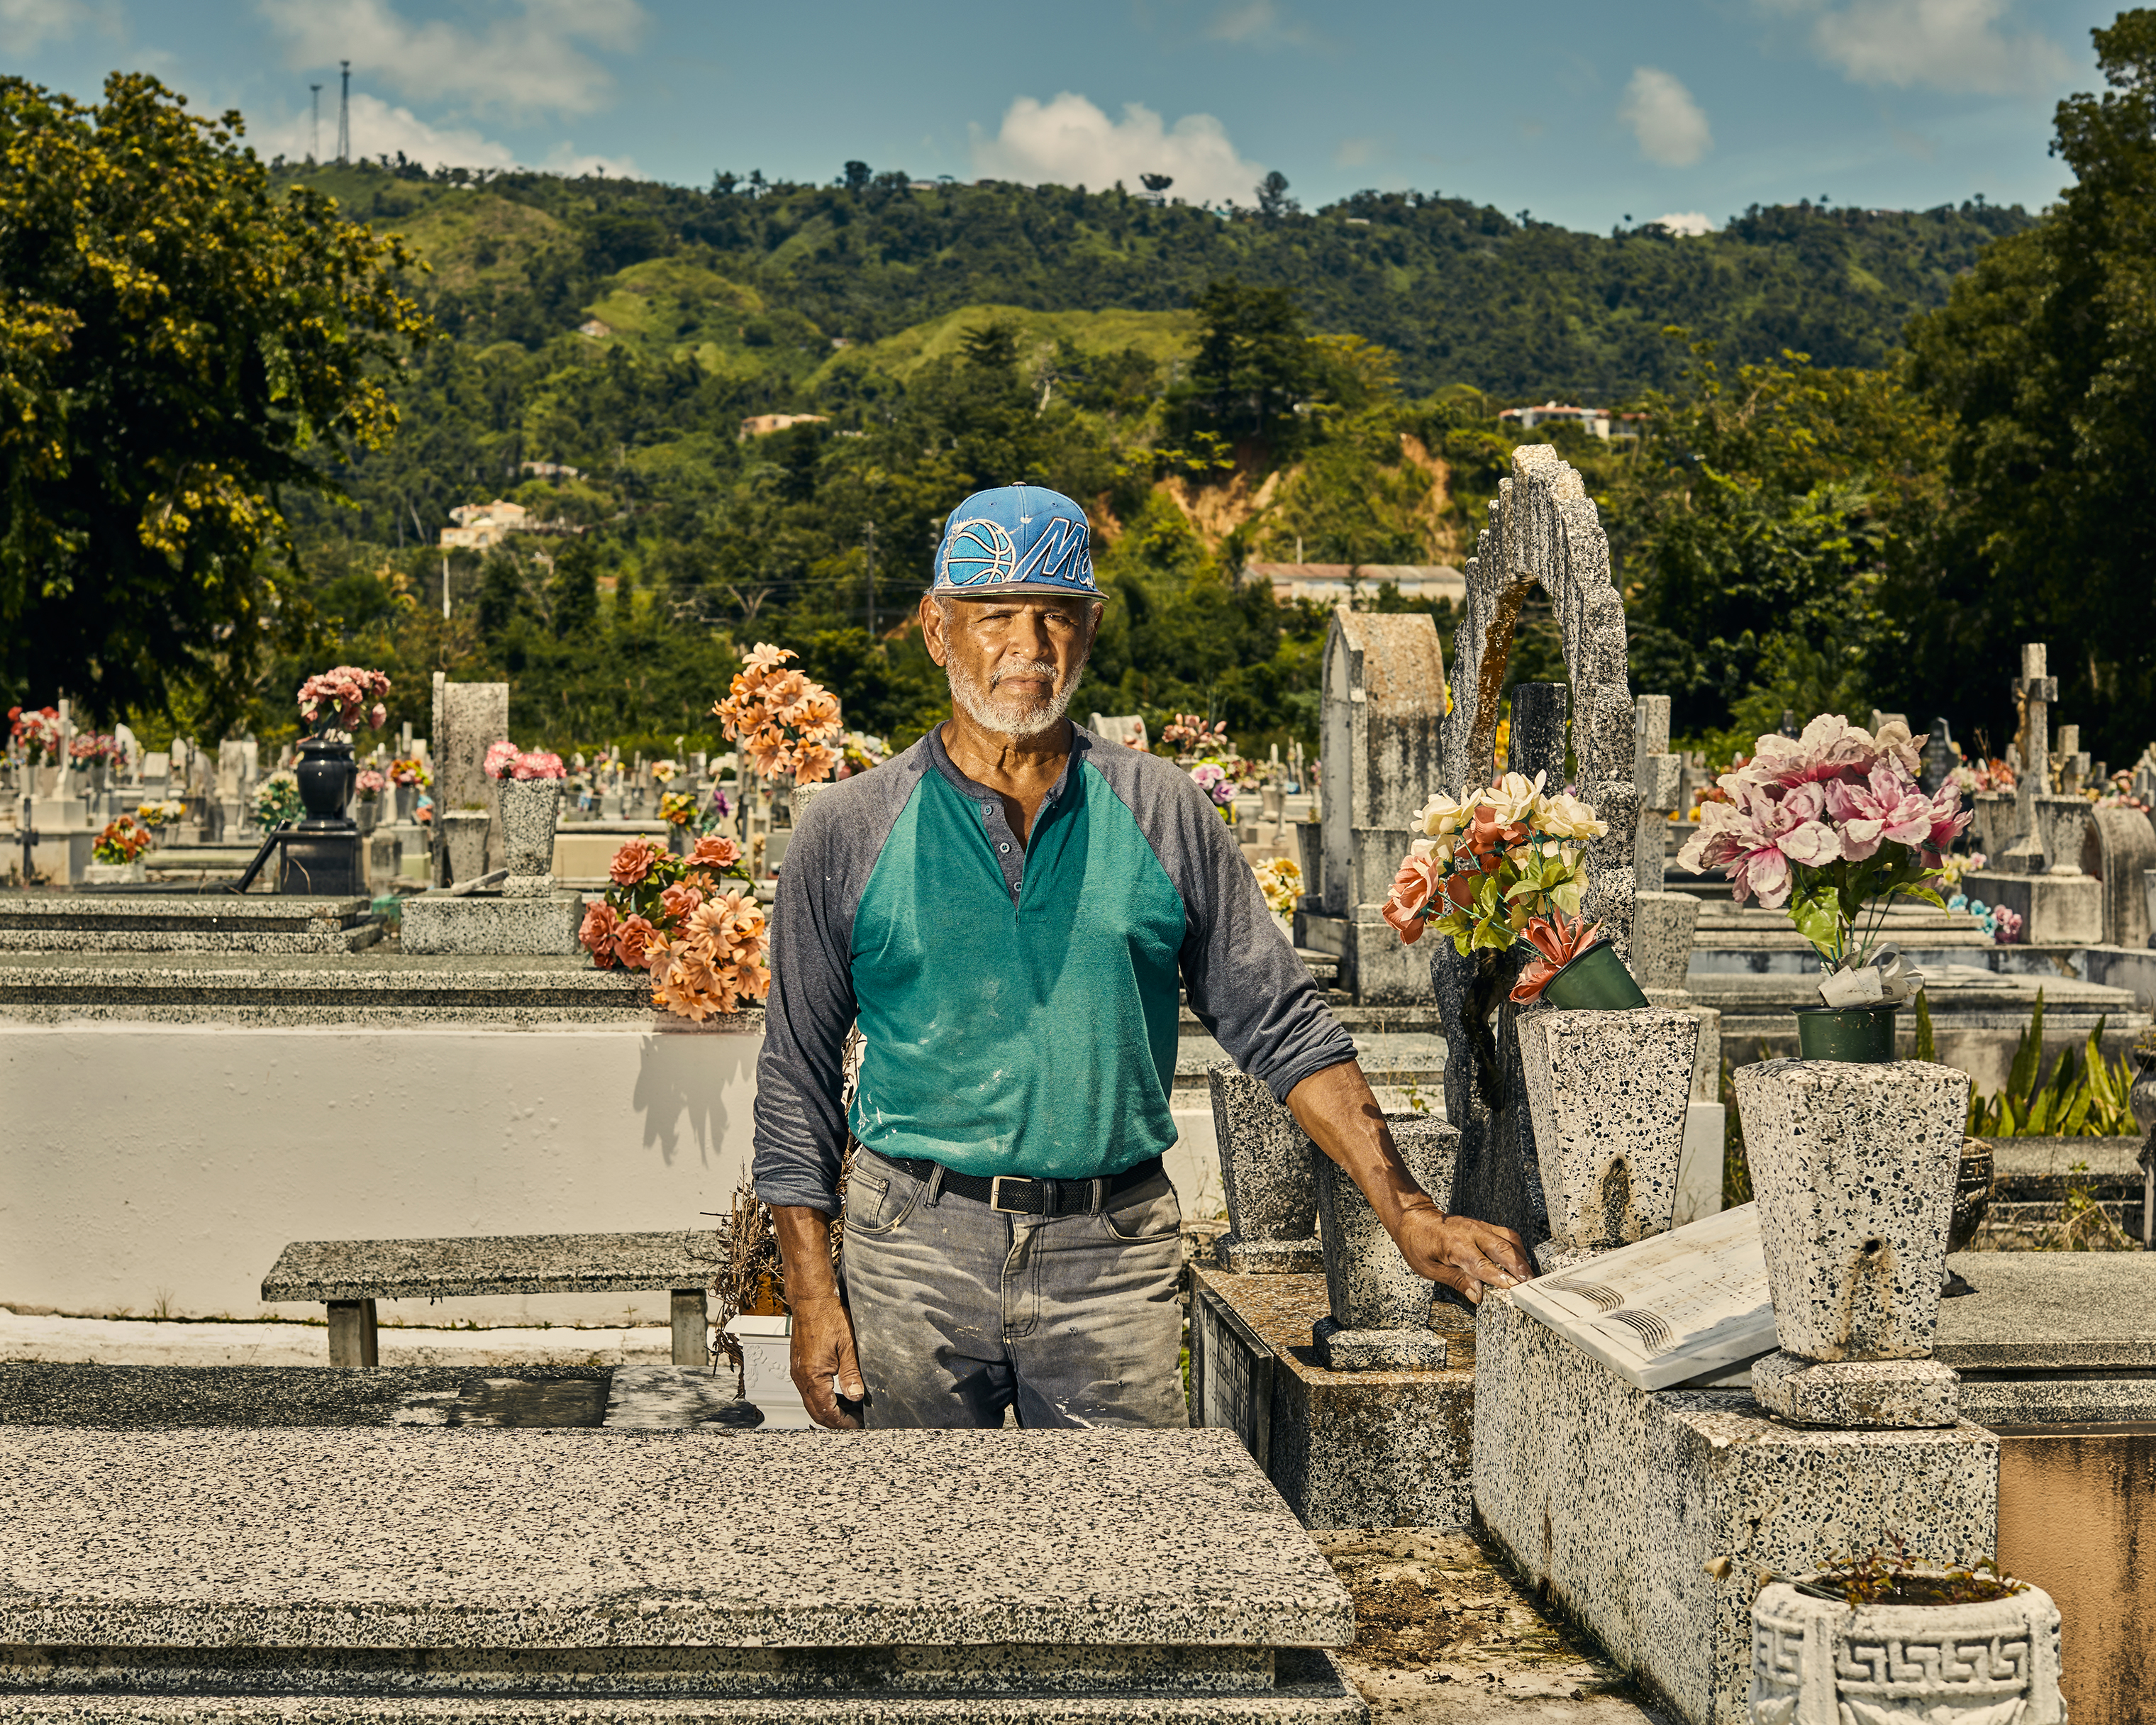 Gravekeeper Tulio Collazo Vega poses by the grave of three elderly sisters who where killed by a landslide the day Maria hit Puerto Rico. (Christopher Gregory for TIME)